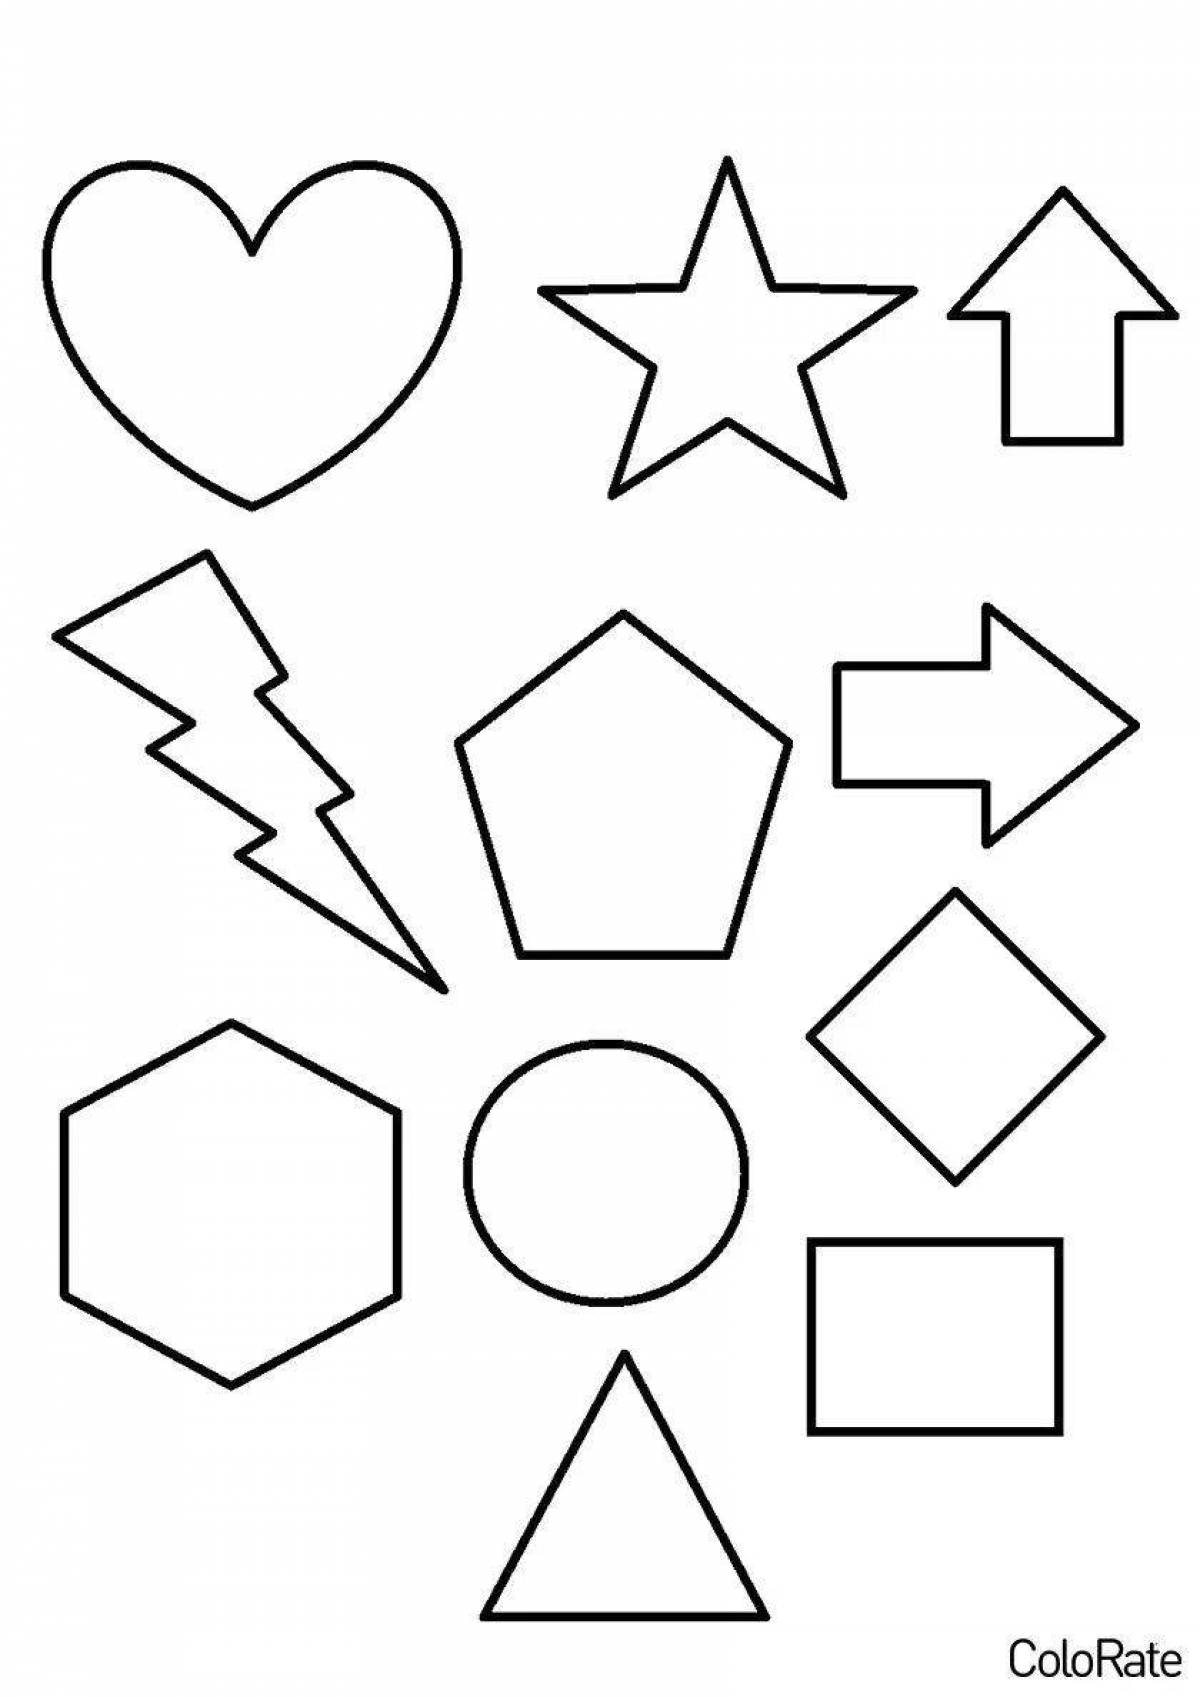 Geometric shapes for 4 year olds #6